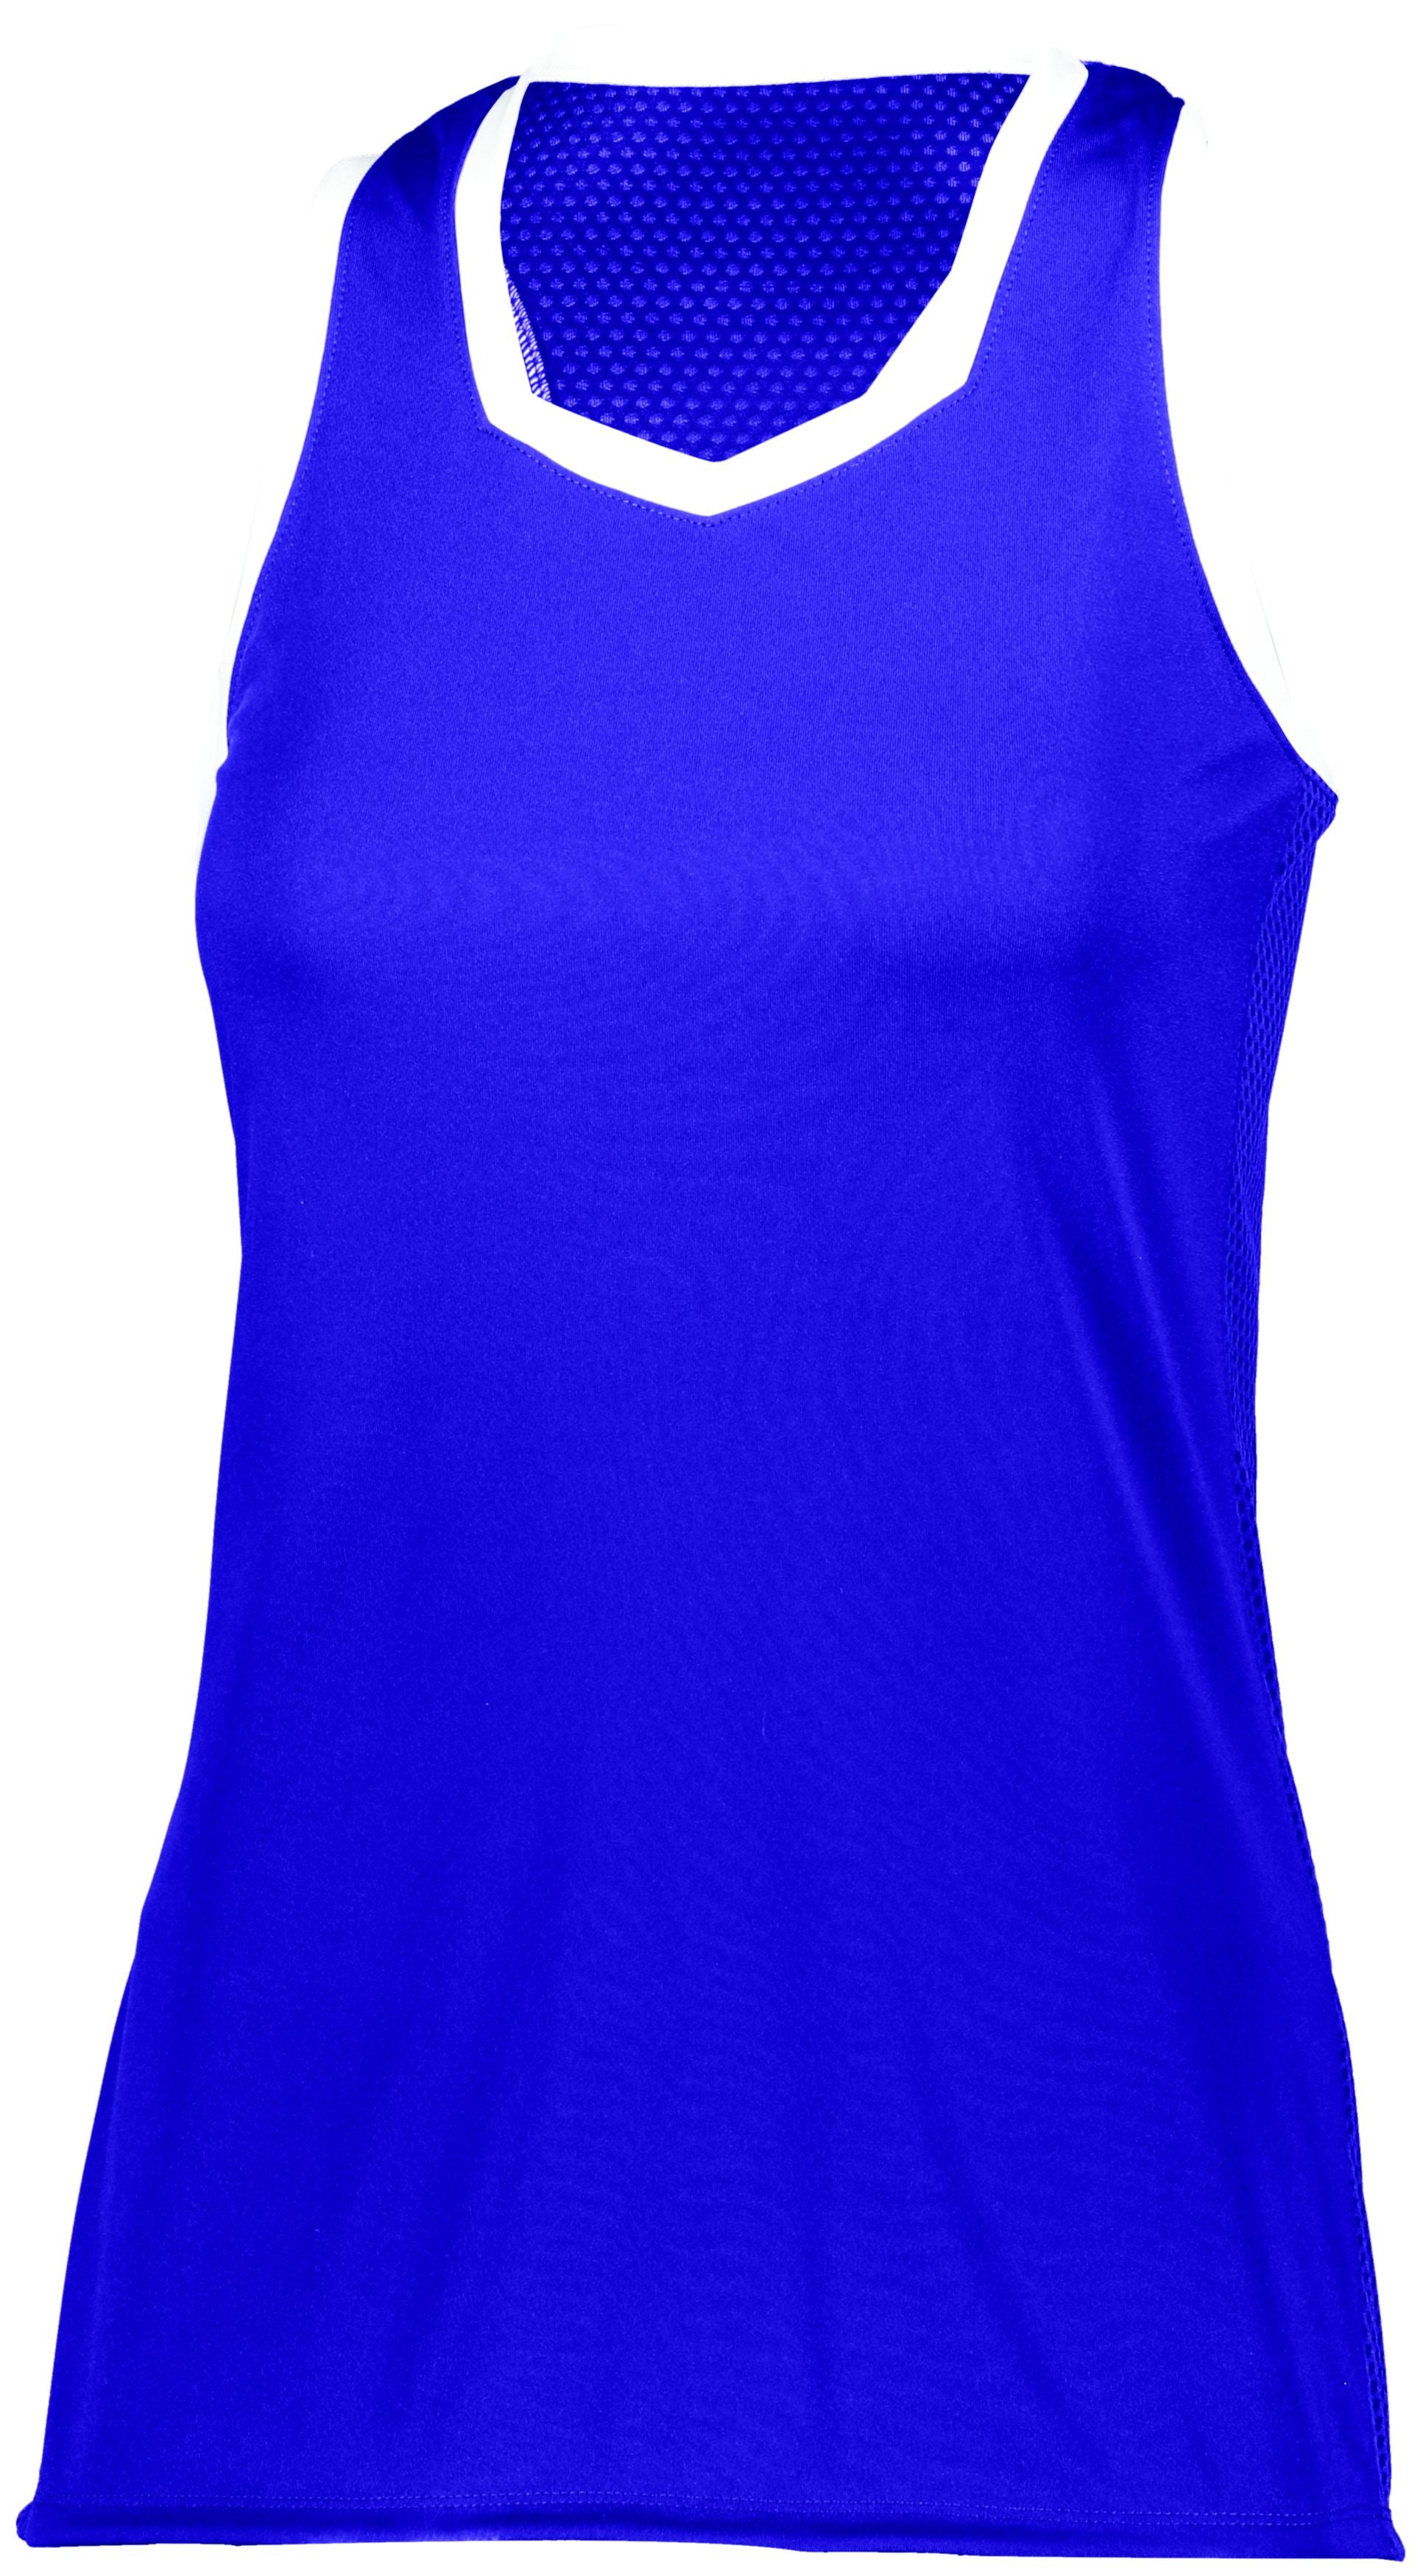 Augusta Sportswear Girls Crosse Jersey in Purple/White  -Part of the Girls, Augusta-Products, Girls-Jersey, Shirts product lines at KanaleyCreations.com